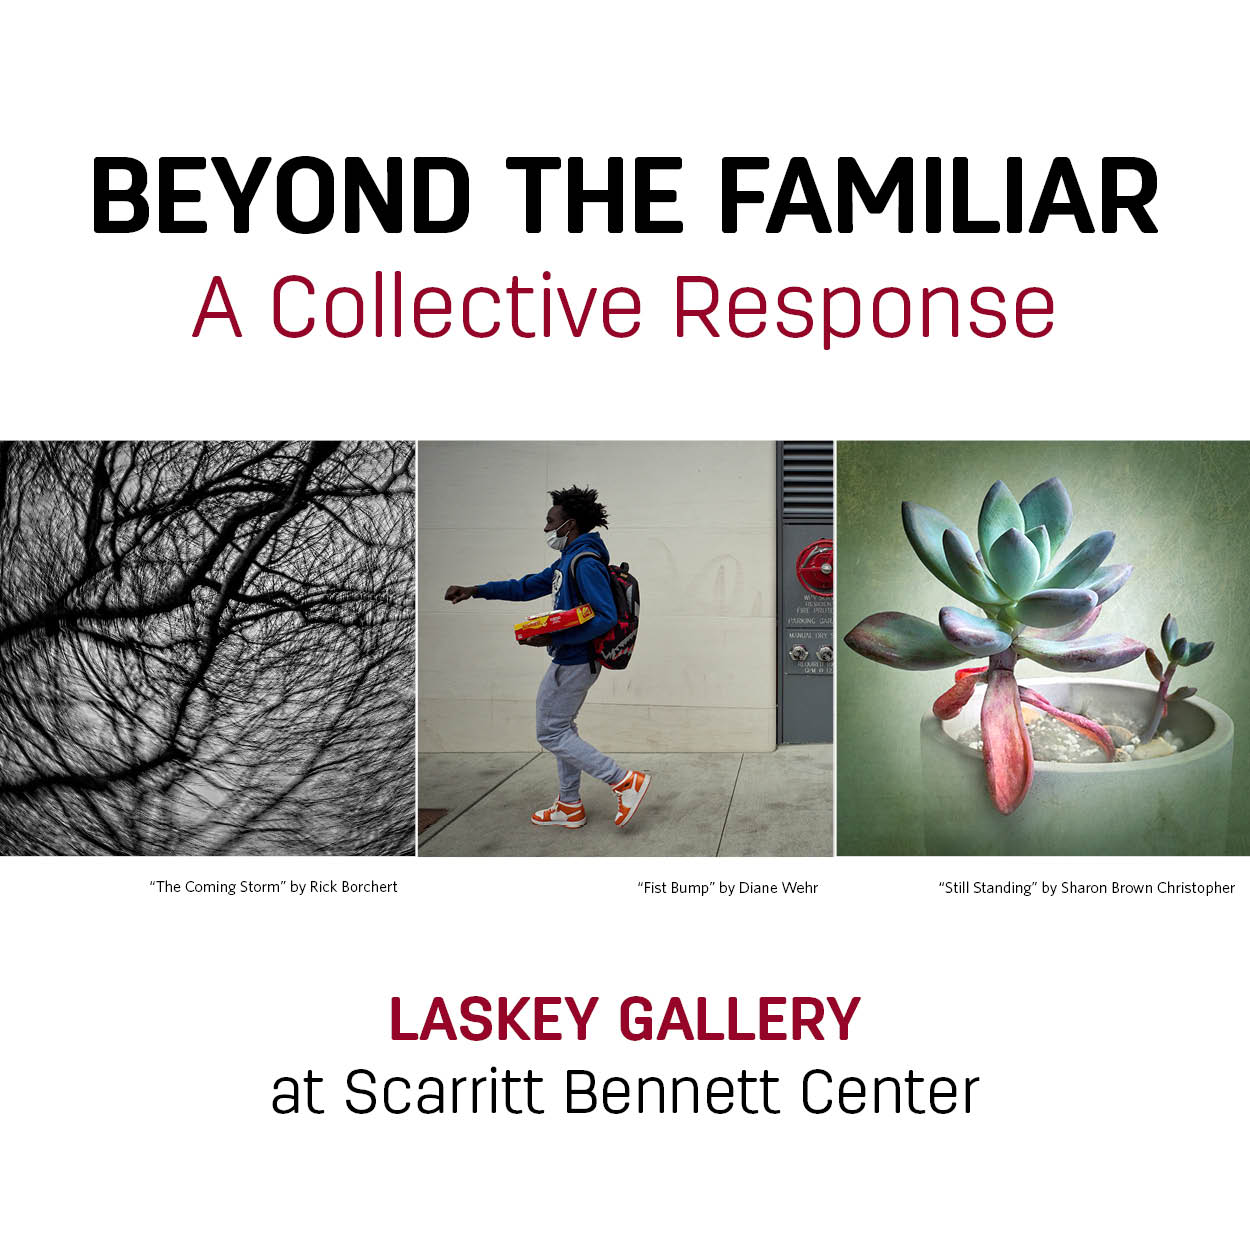 Beyond the Familiar: A Collective Response